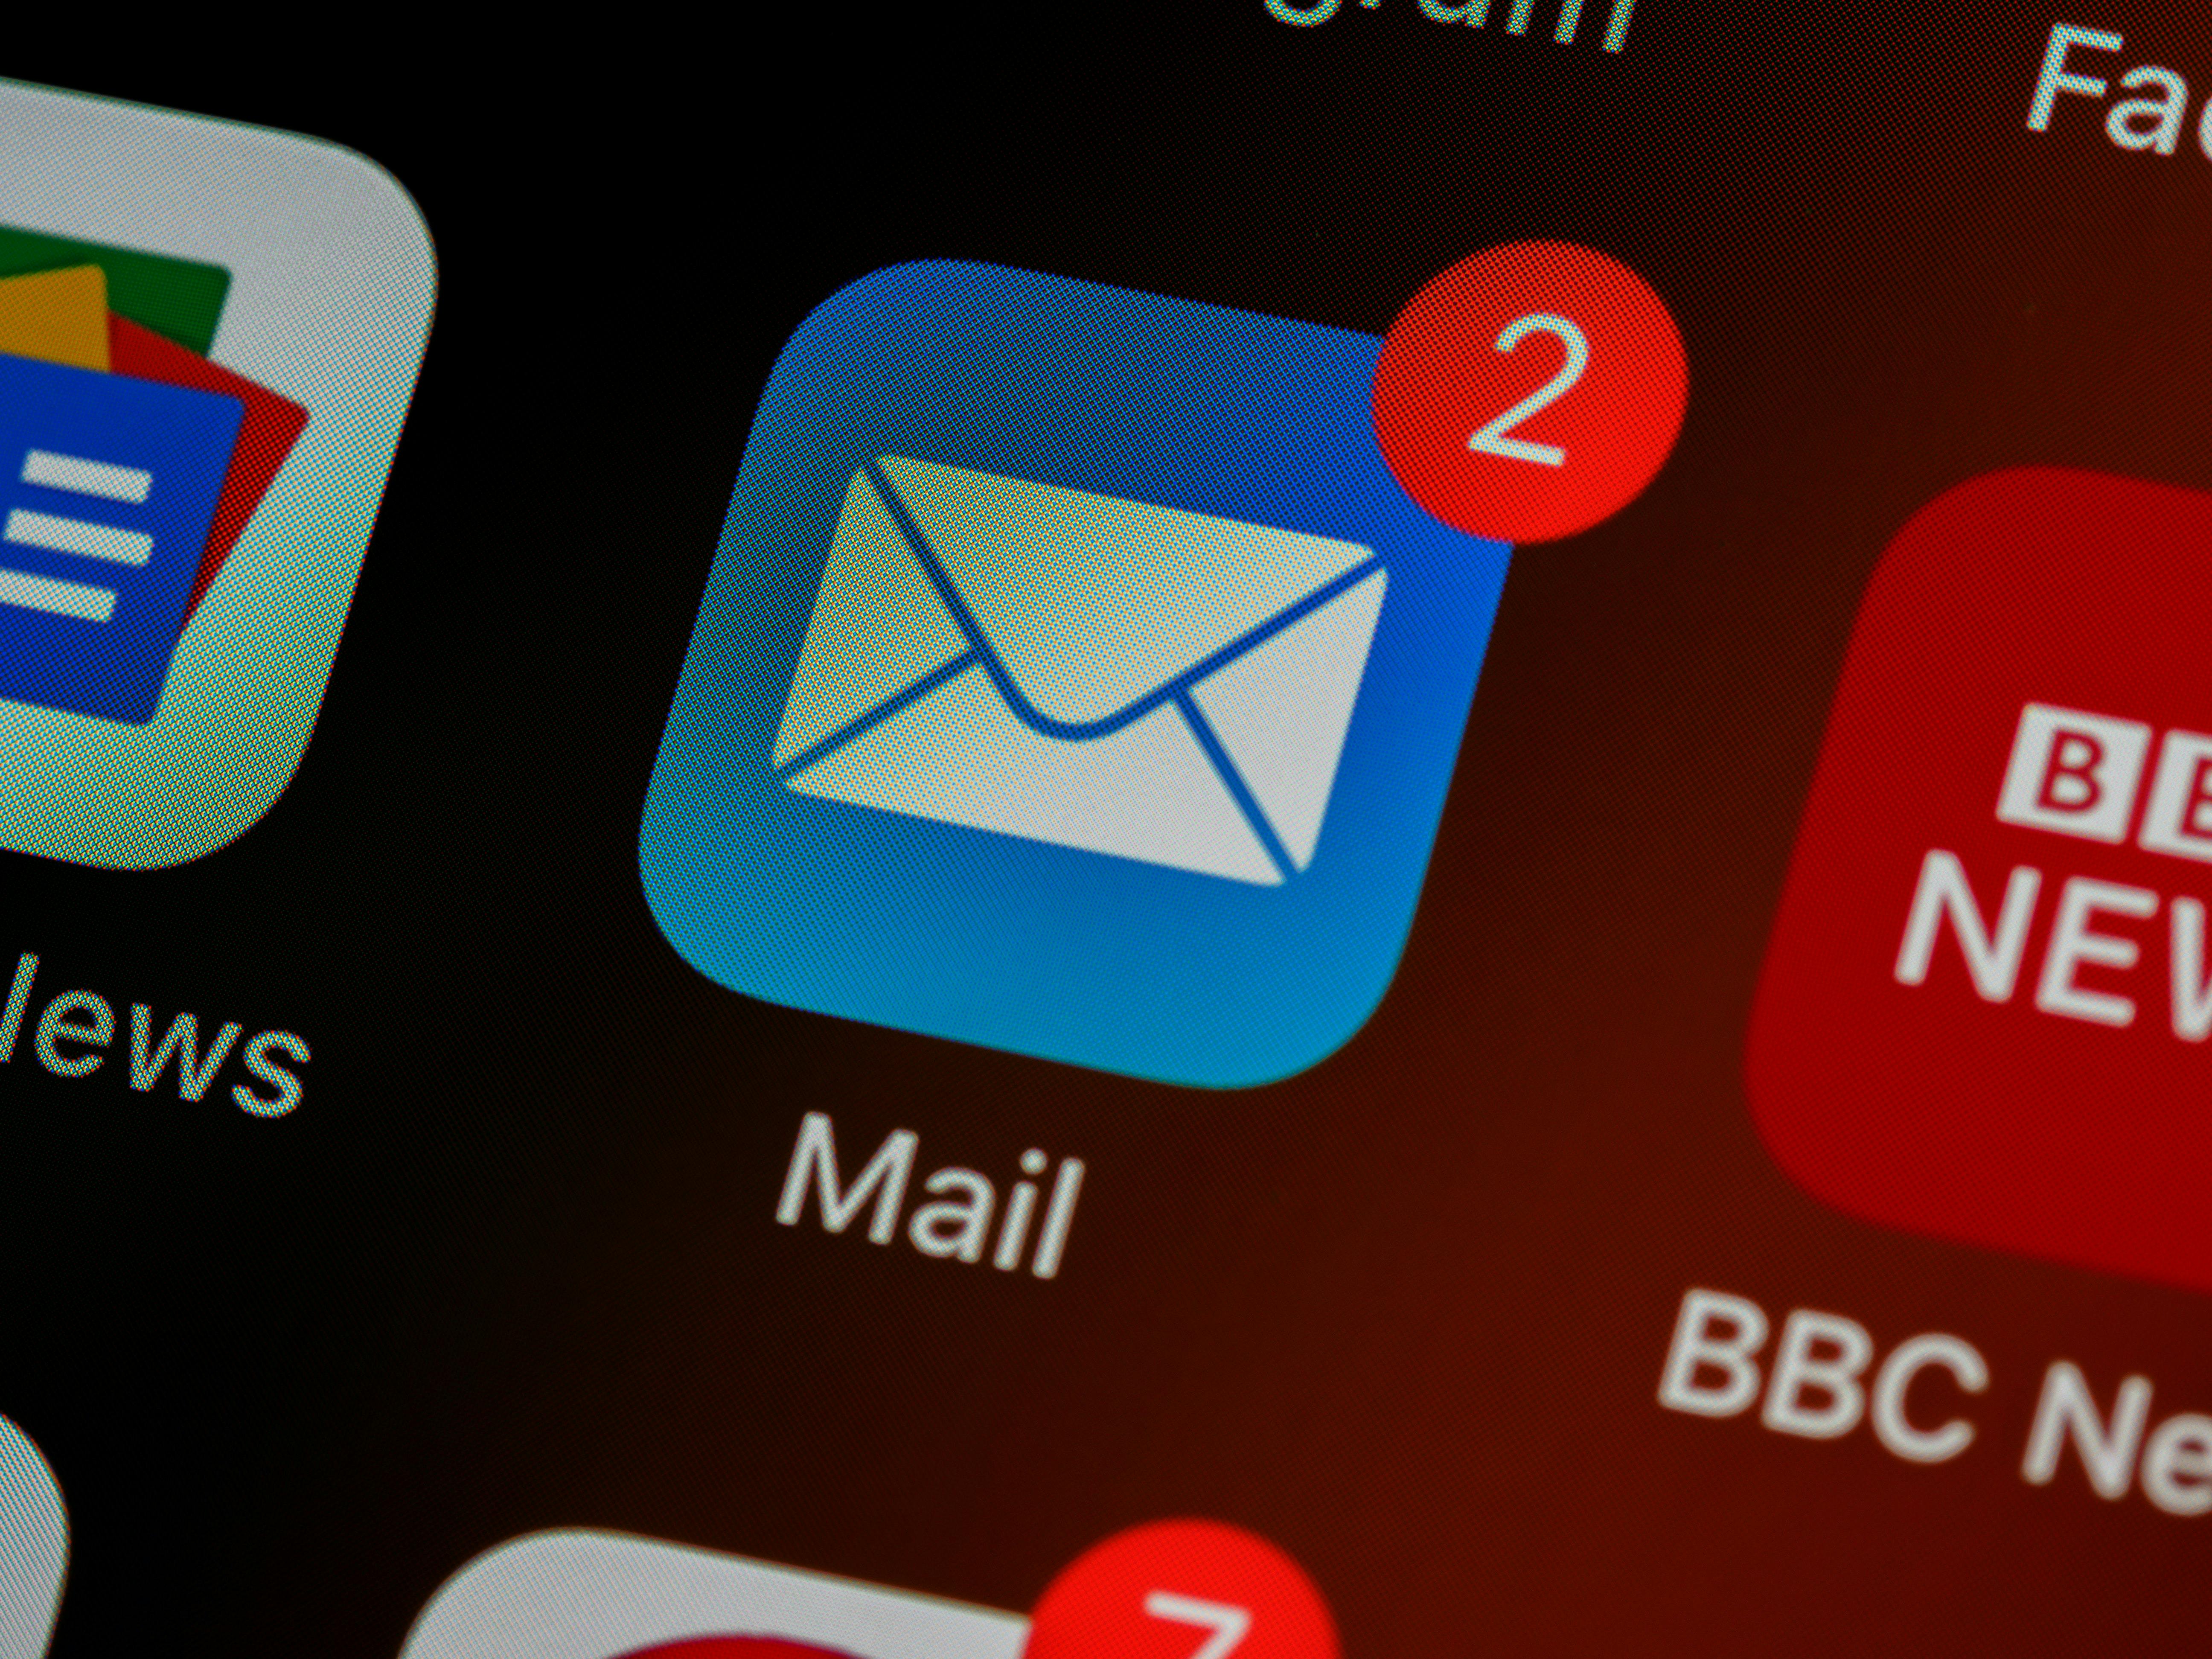 An email app on a phone shows unread messages